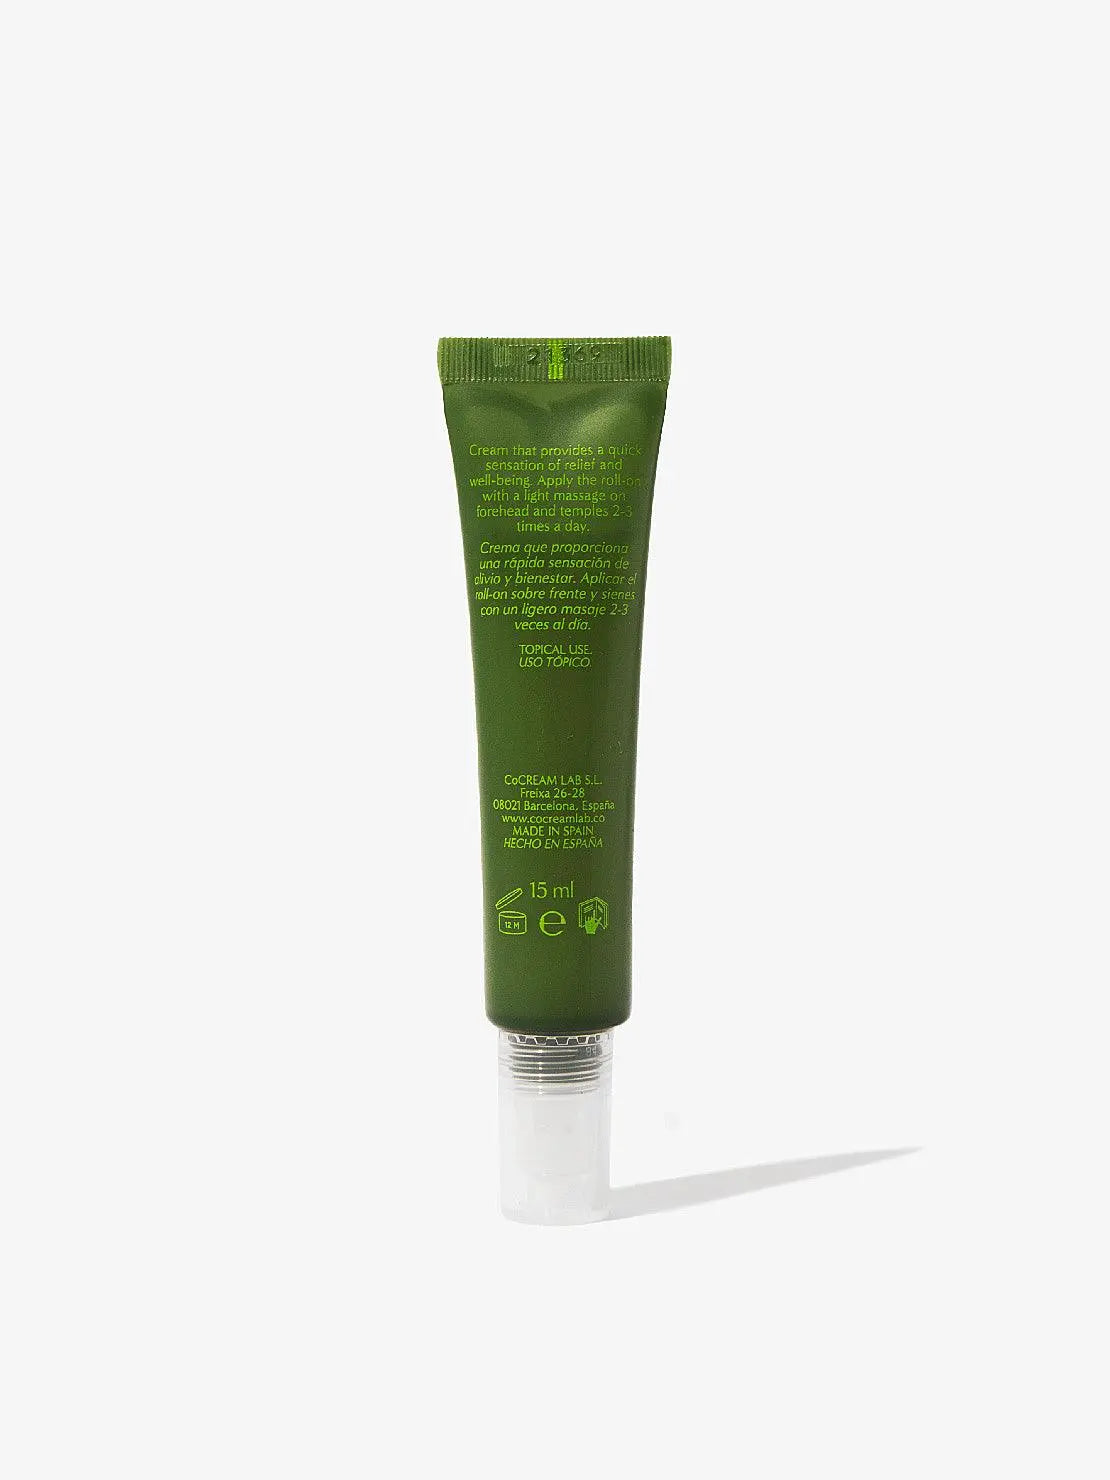 A green tube of Head Cream 15ml with a white screw cap, labeled "CoCream Lab Head Cream 15ml" in light green text, set against a plain white background, reminiscent of the sleek design you might find in a chic Barcelona store.